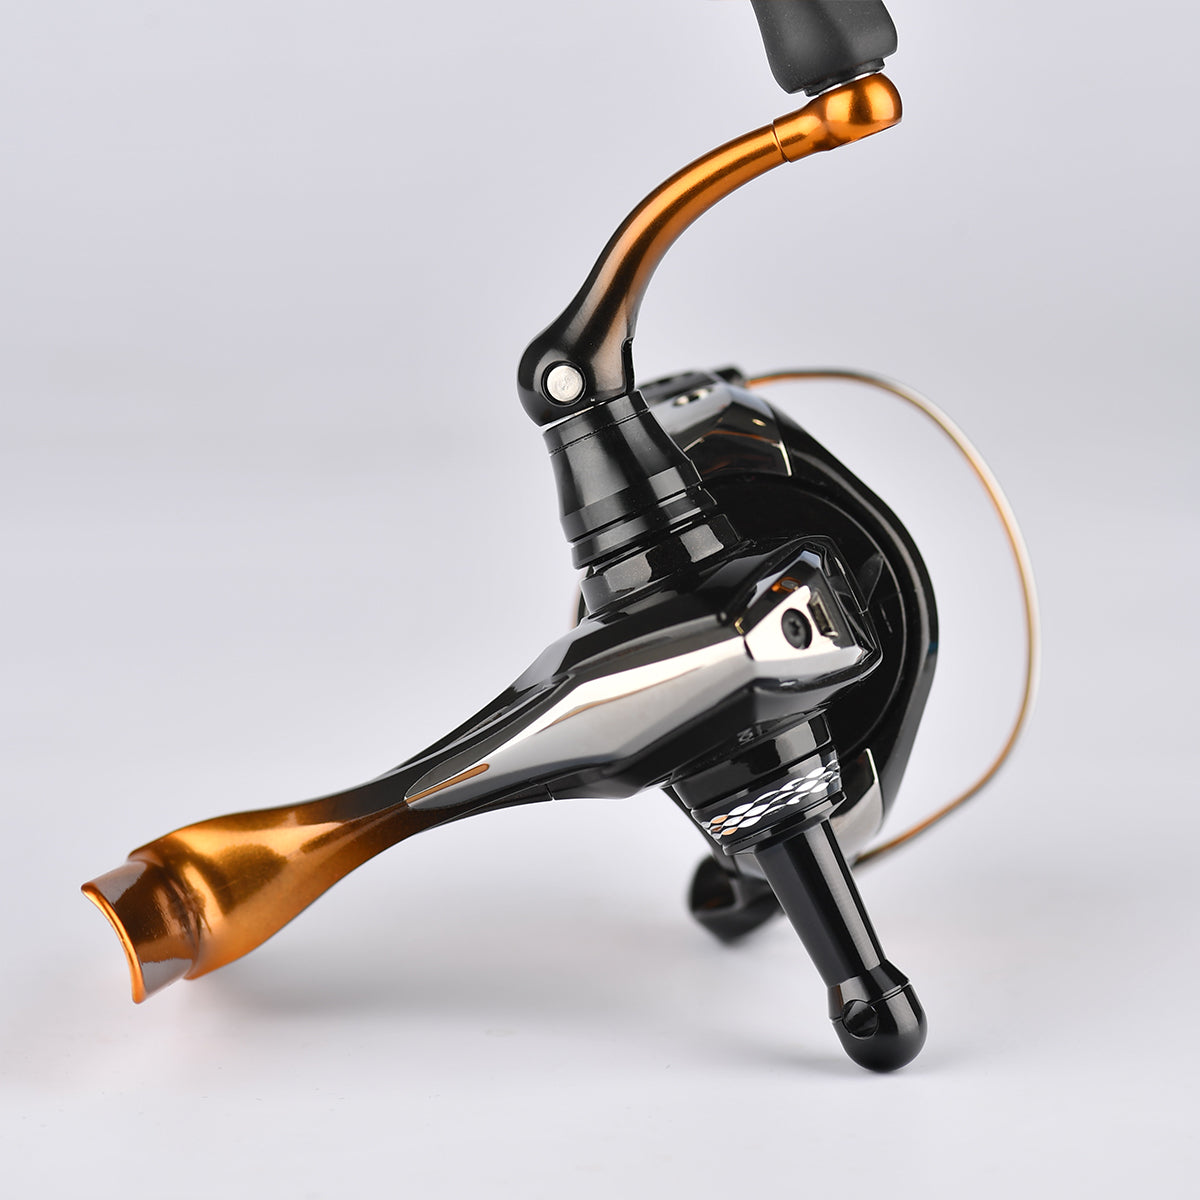 Reel Stand R8 for Shimano Reels – The Hook Up Tackle